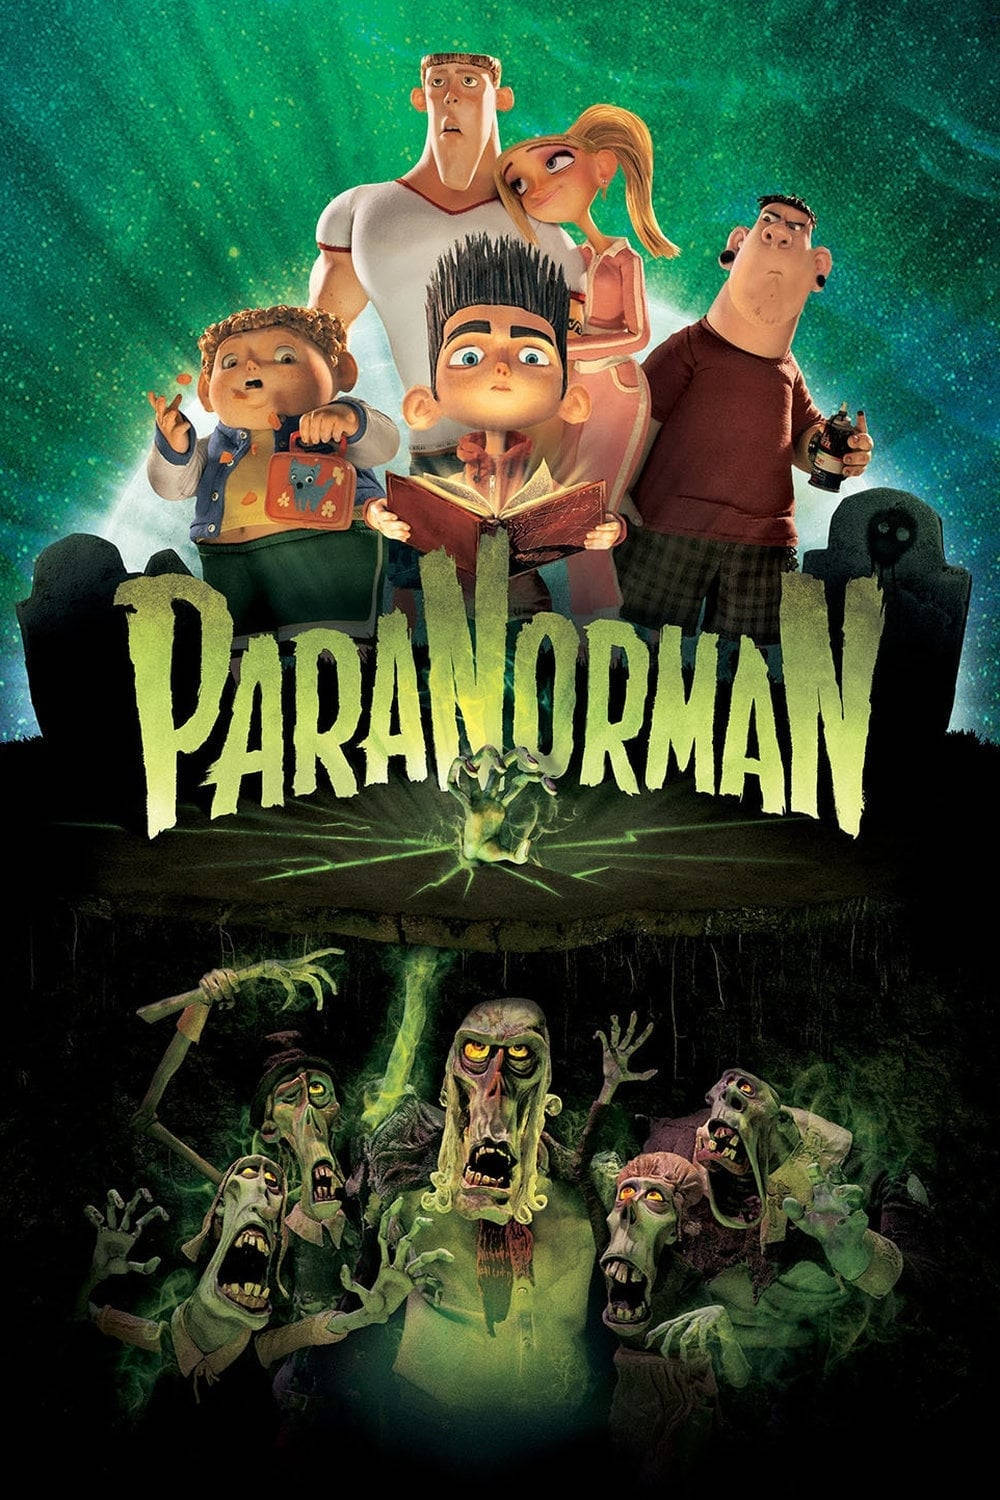 Paranorman confronting the supernatural on a dark cinematic poster Wallpaper